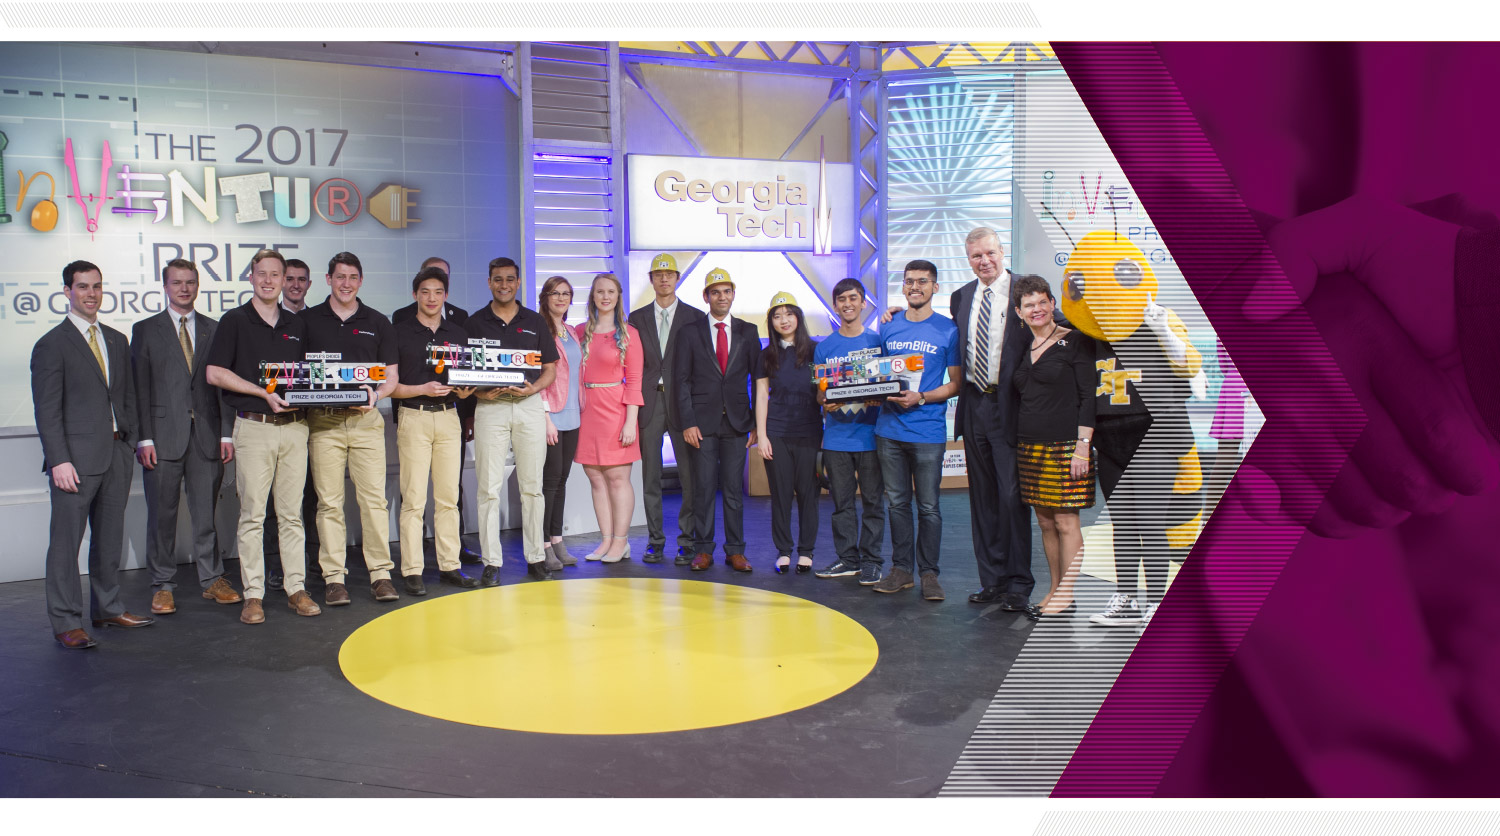 Winners of the 2017 InVenture competition posing on stage with President and Mrs. Peterson and Buzz.